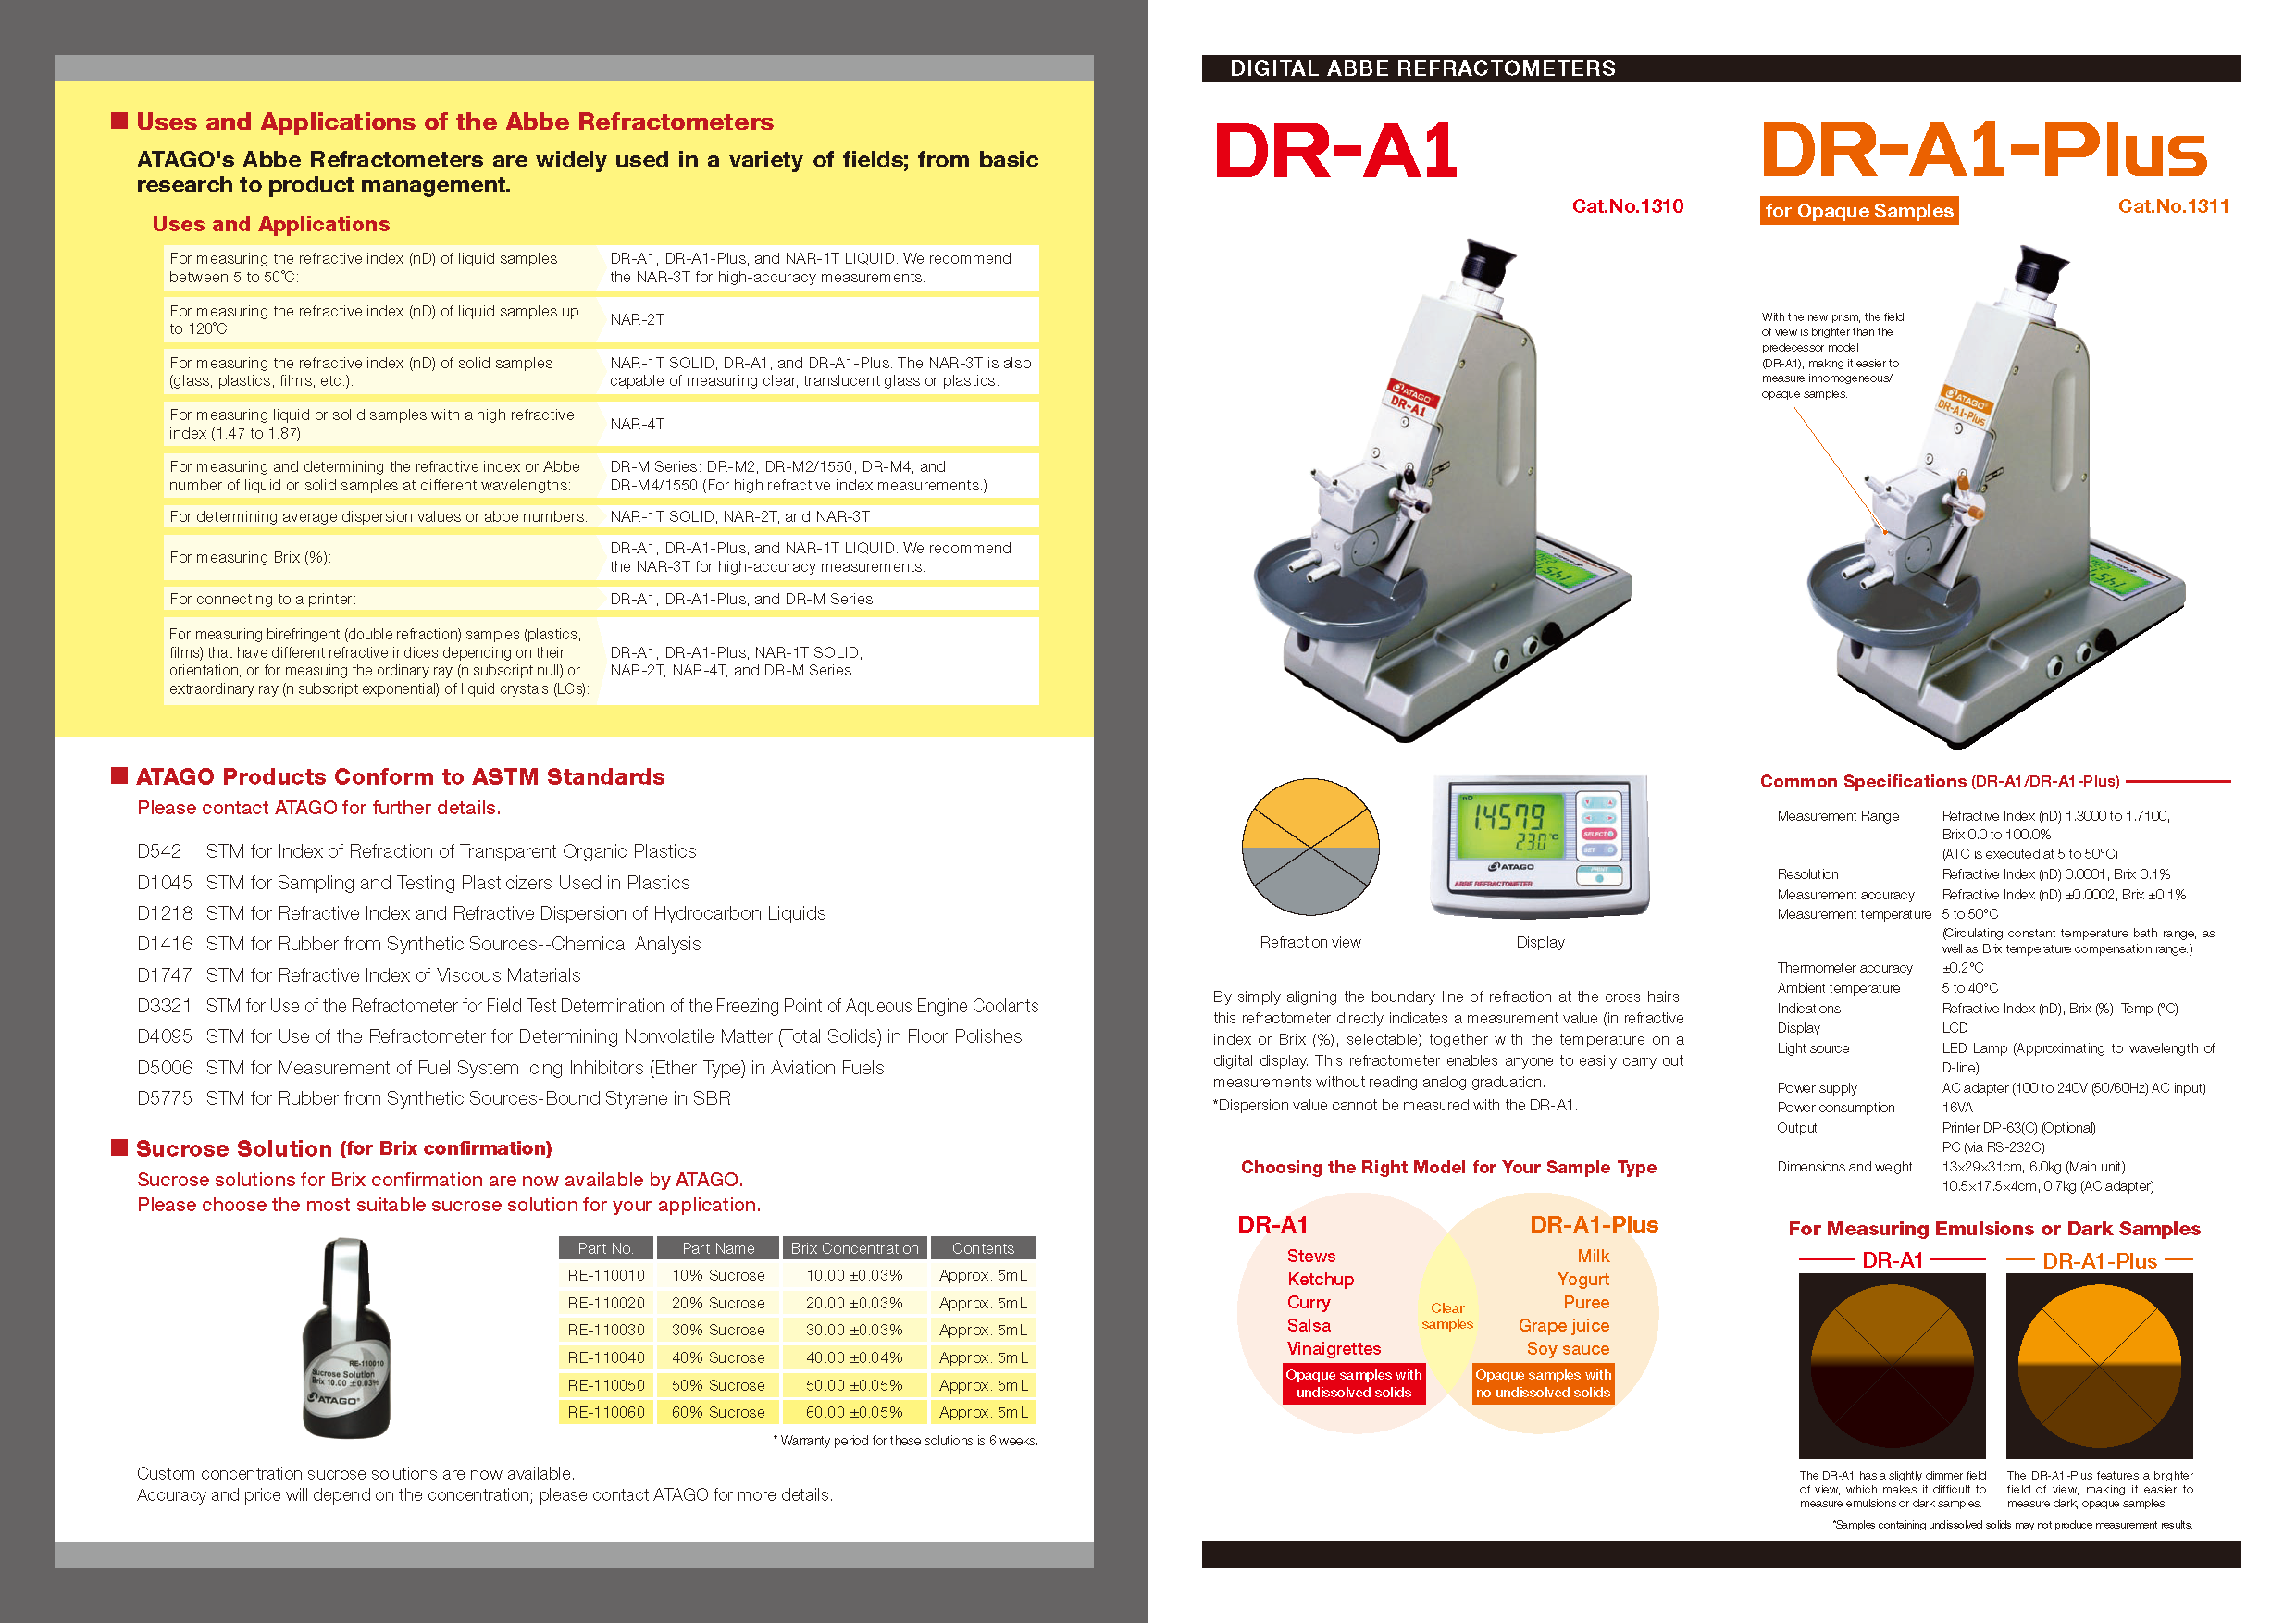 Uses and Applications of the Abbe Refractometers / DR-A1 / DR-A1-Plus